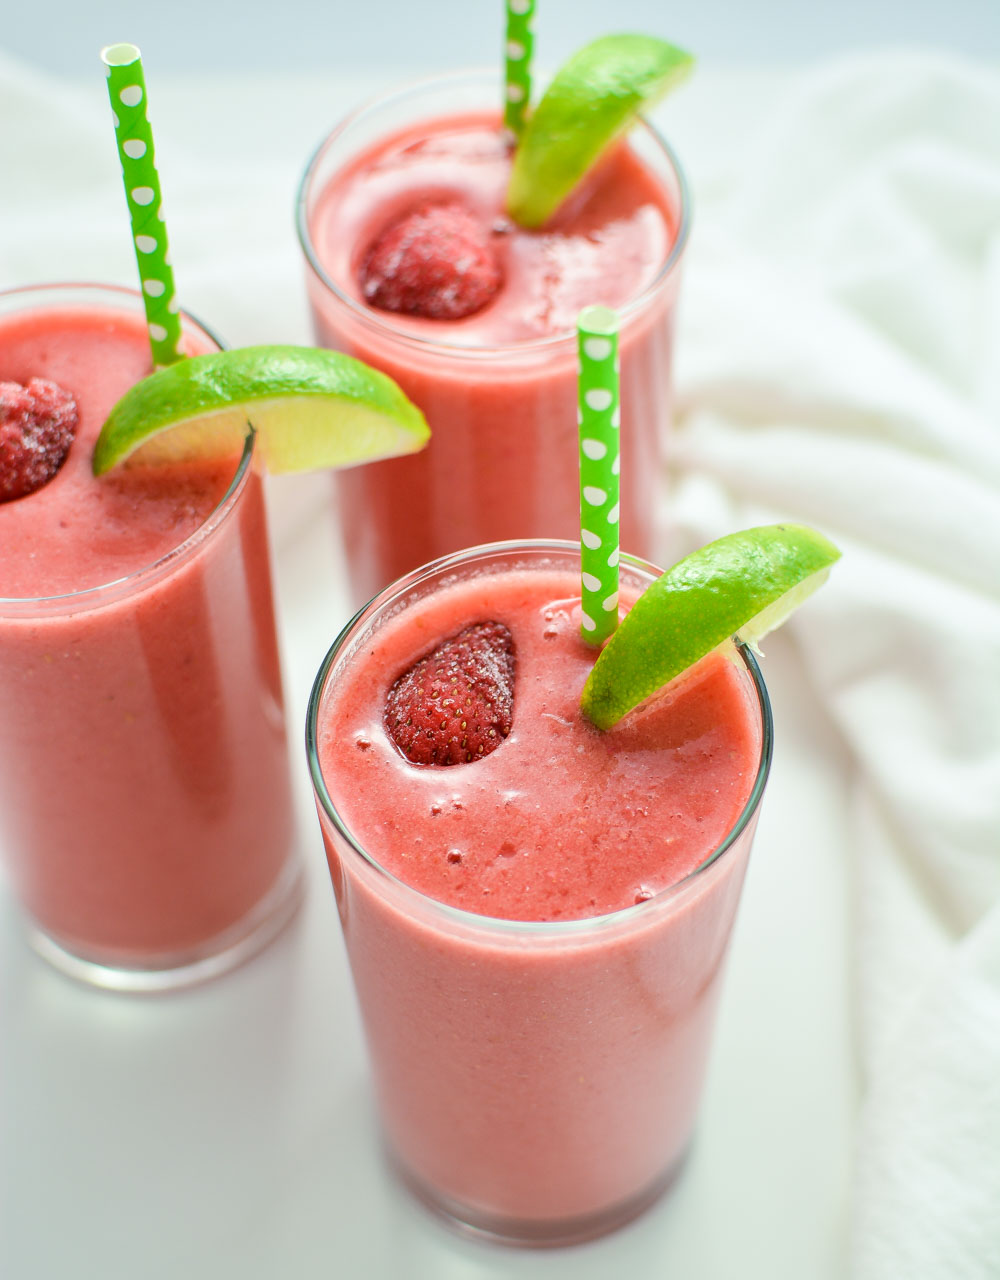 Triple Berry Limeade Smoothies - a tart, refreshing, and satisfying way to start your day!